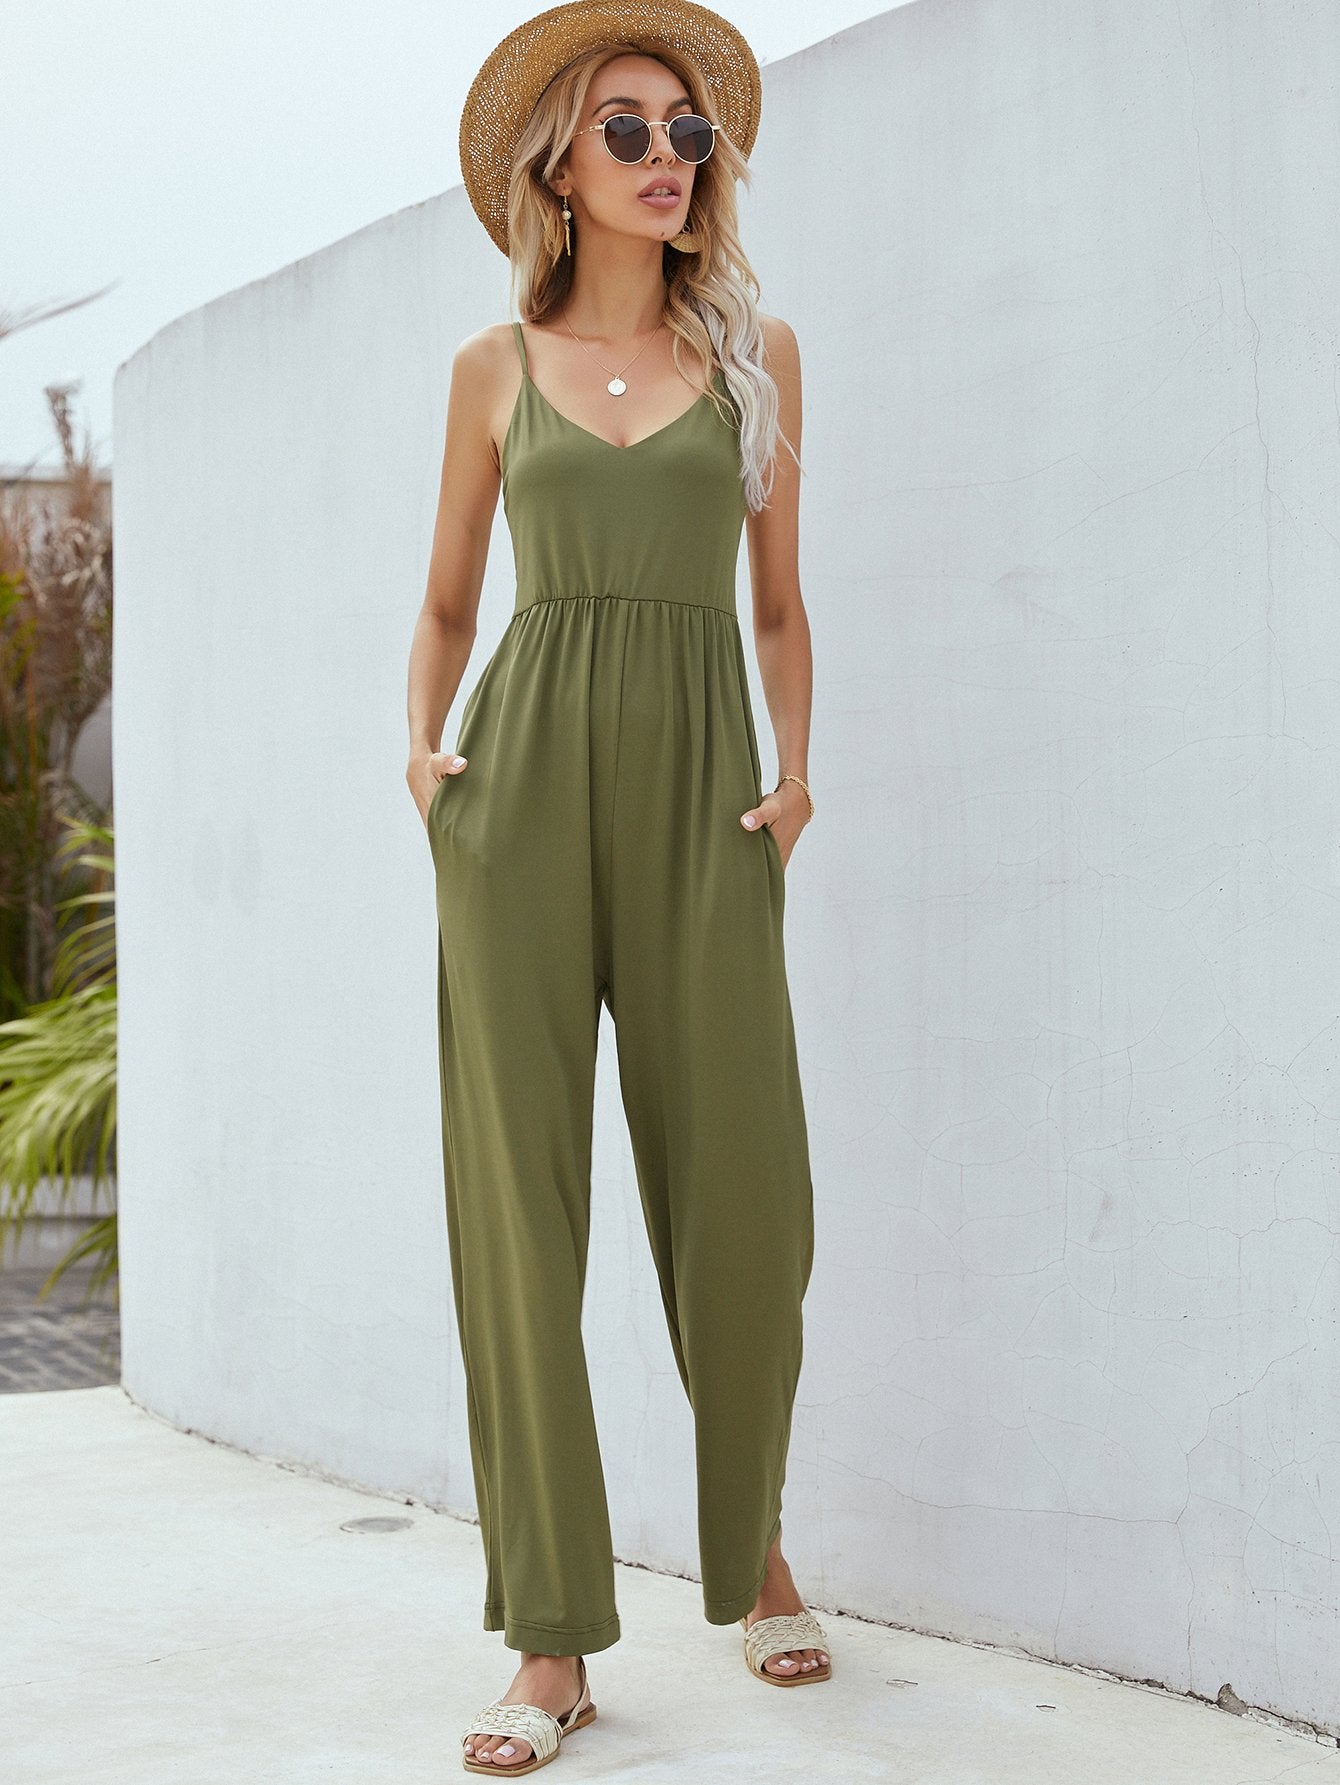 Adjustable Spaghetti Strap Jumpsuit with Pockets-TOPS / DRESSES-[Adult]-[Female]-Army Green-S-Blue Zone Planet